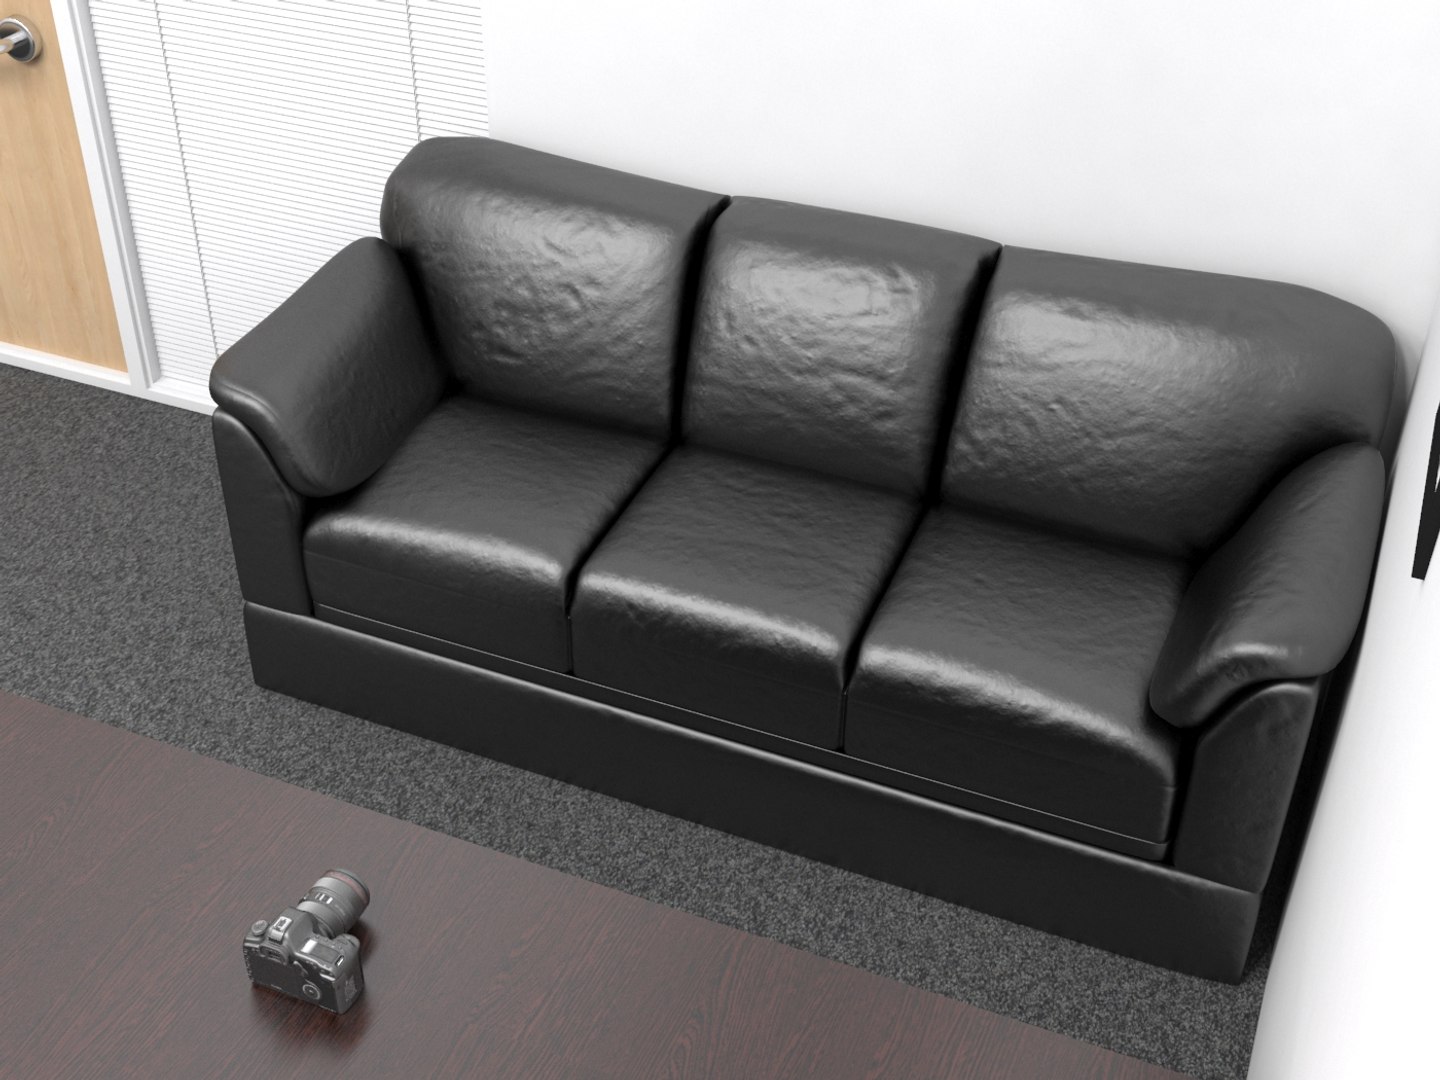 Best of Casting couch photo